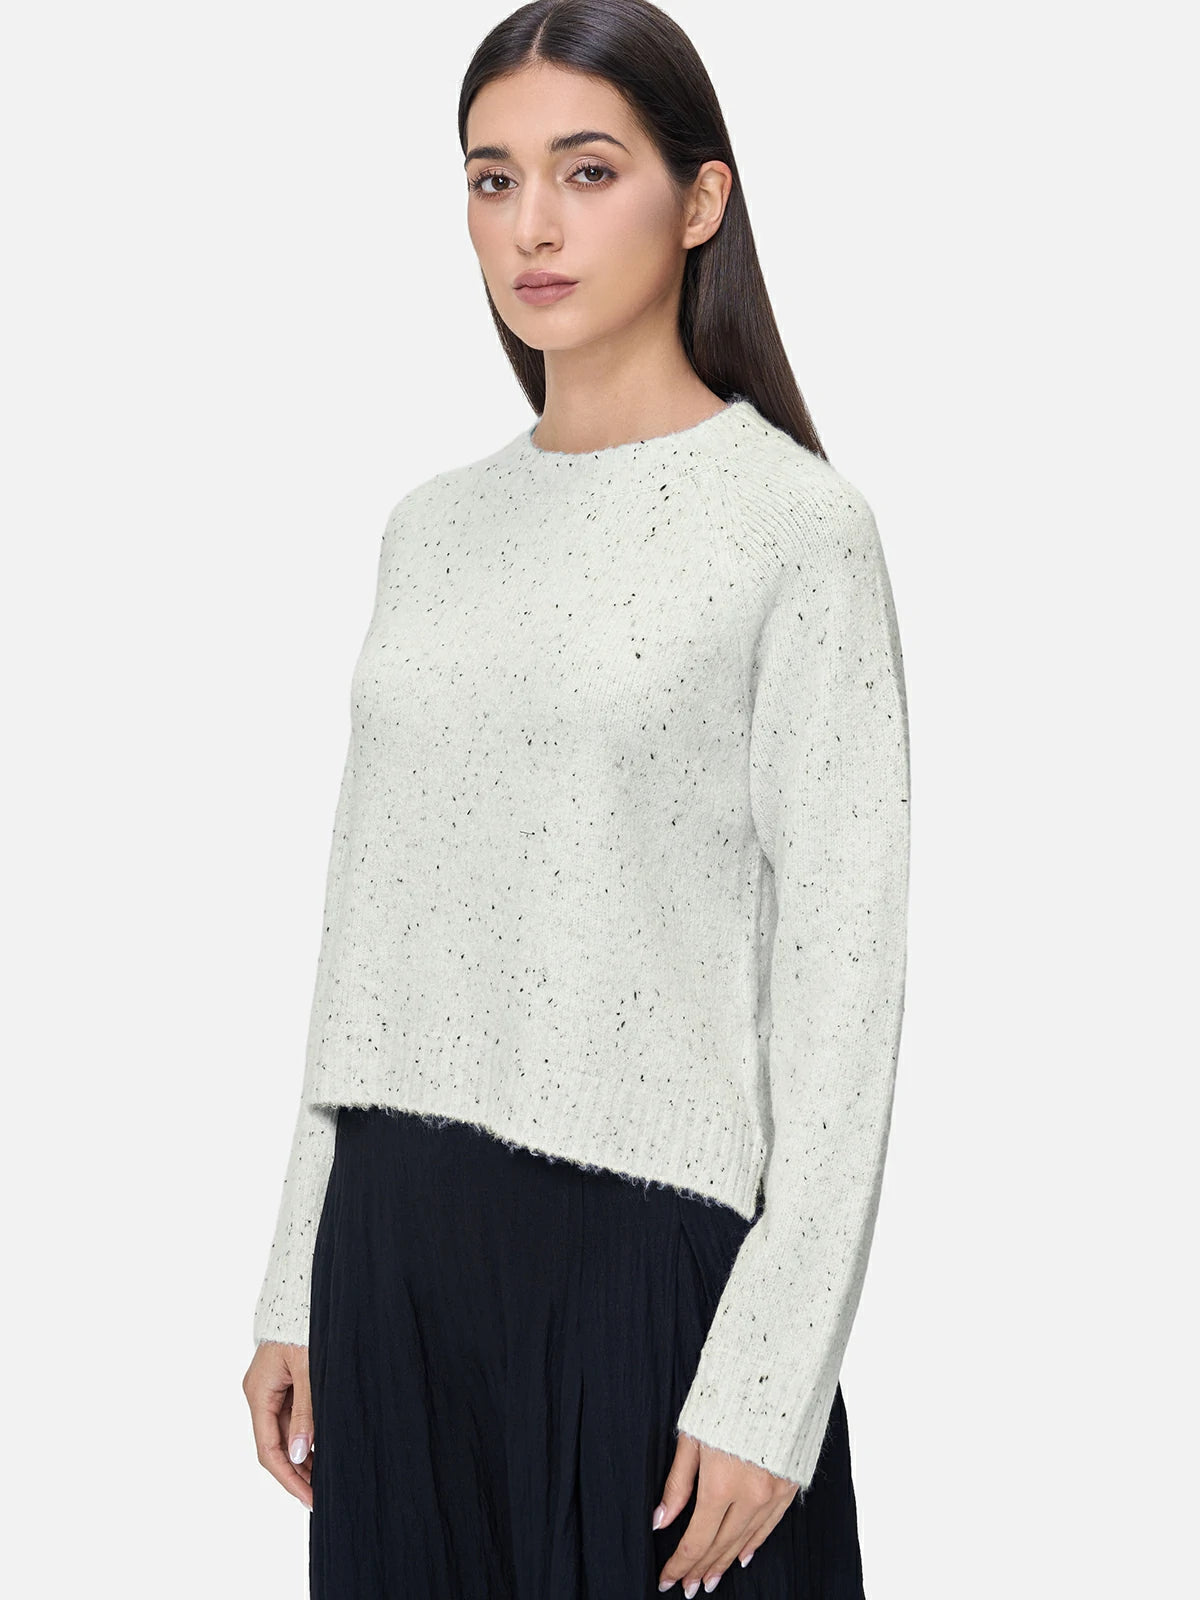 Elevate your wardrobe with this chic white crewneck sweater, adorned with delicate black polka dot embellishments for a stylish and playful look.